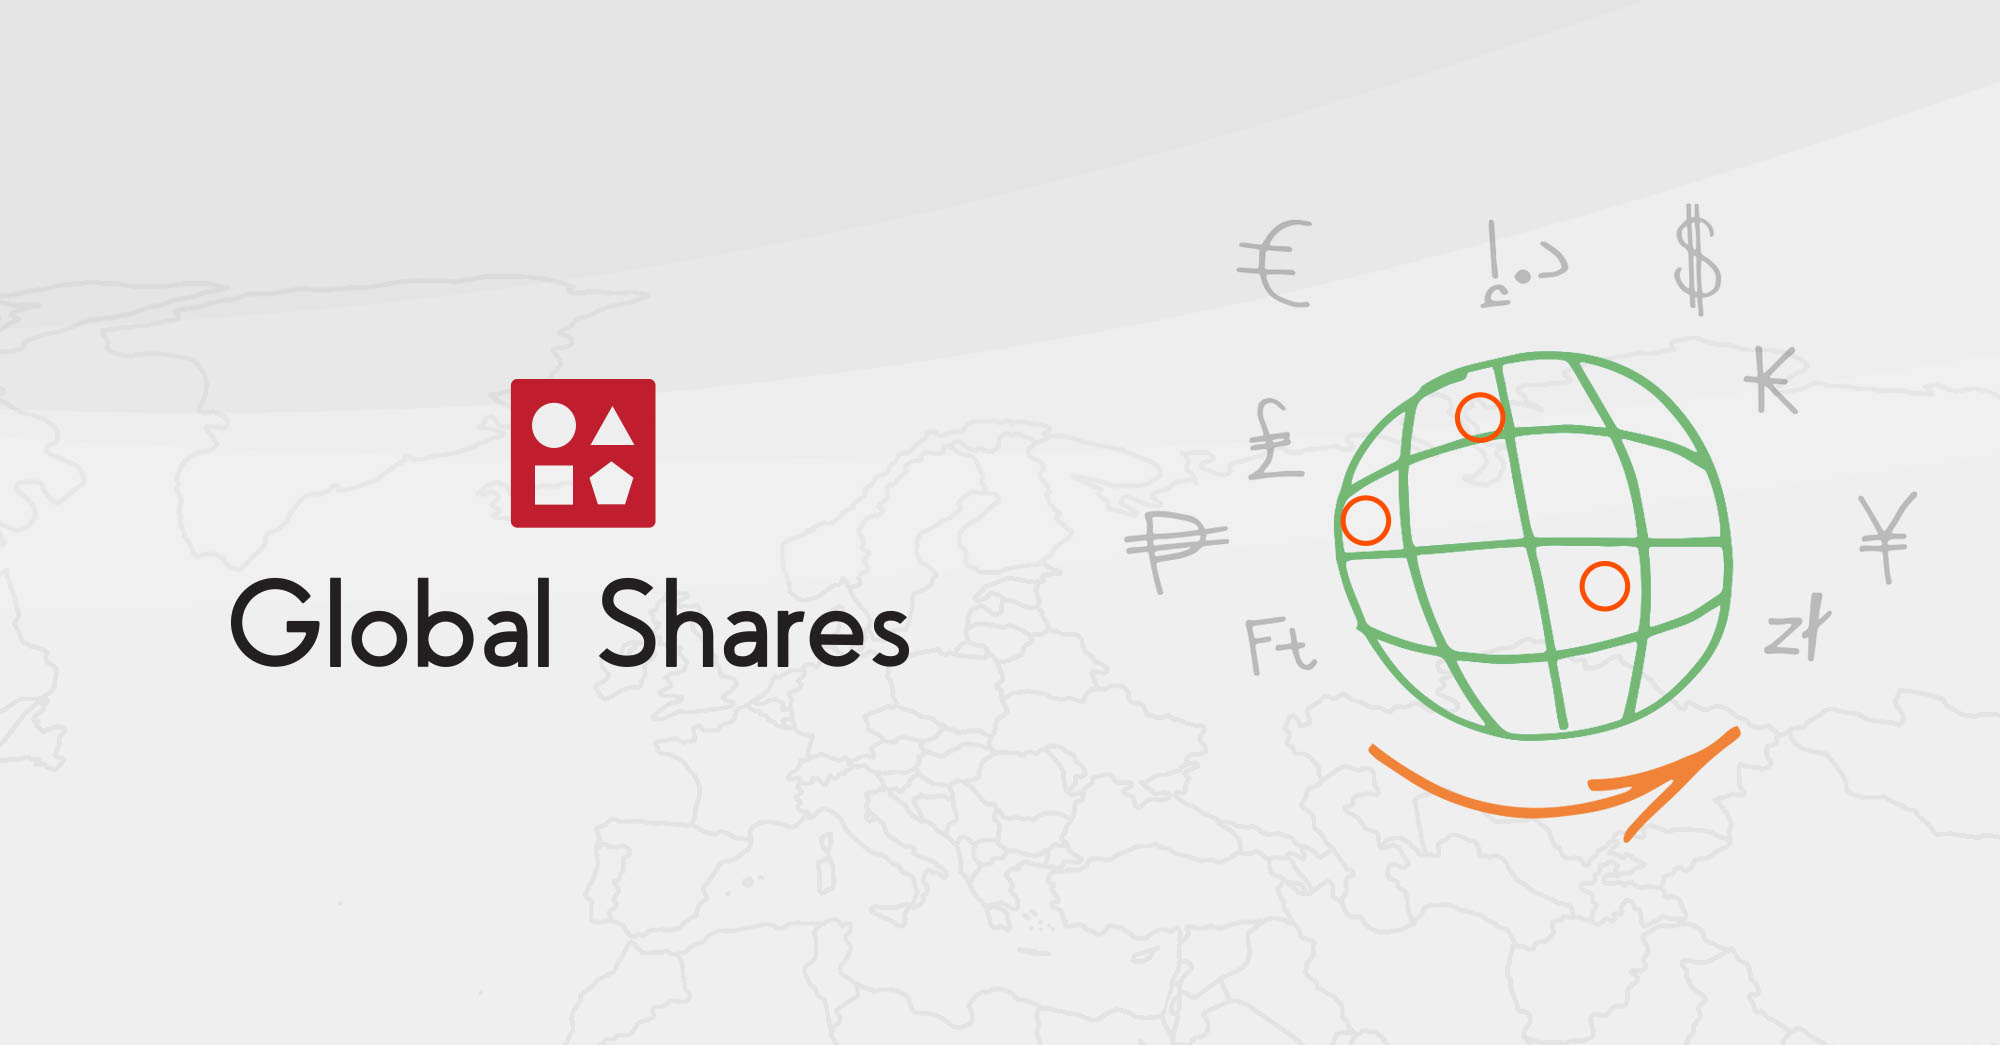 Worldwide Expansion continues for Global Shares